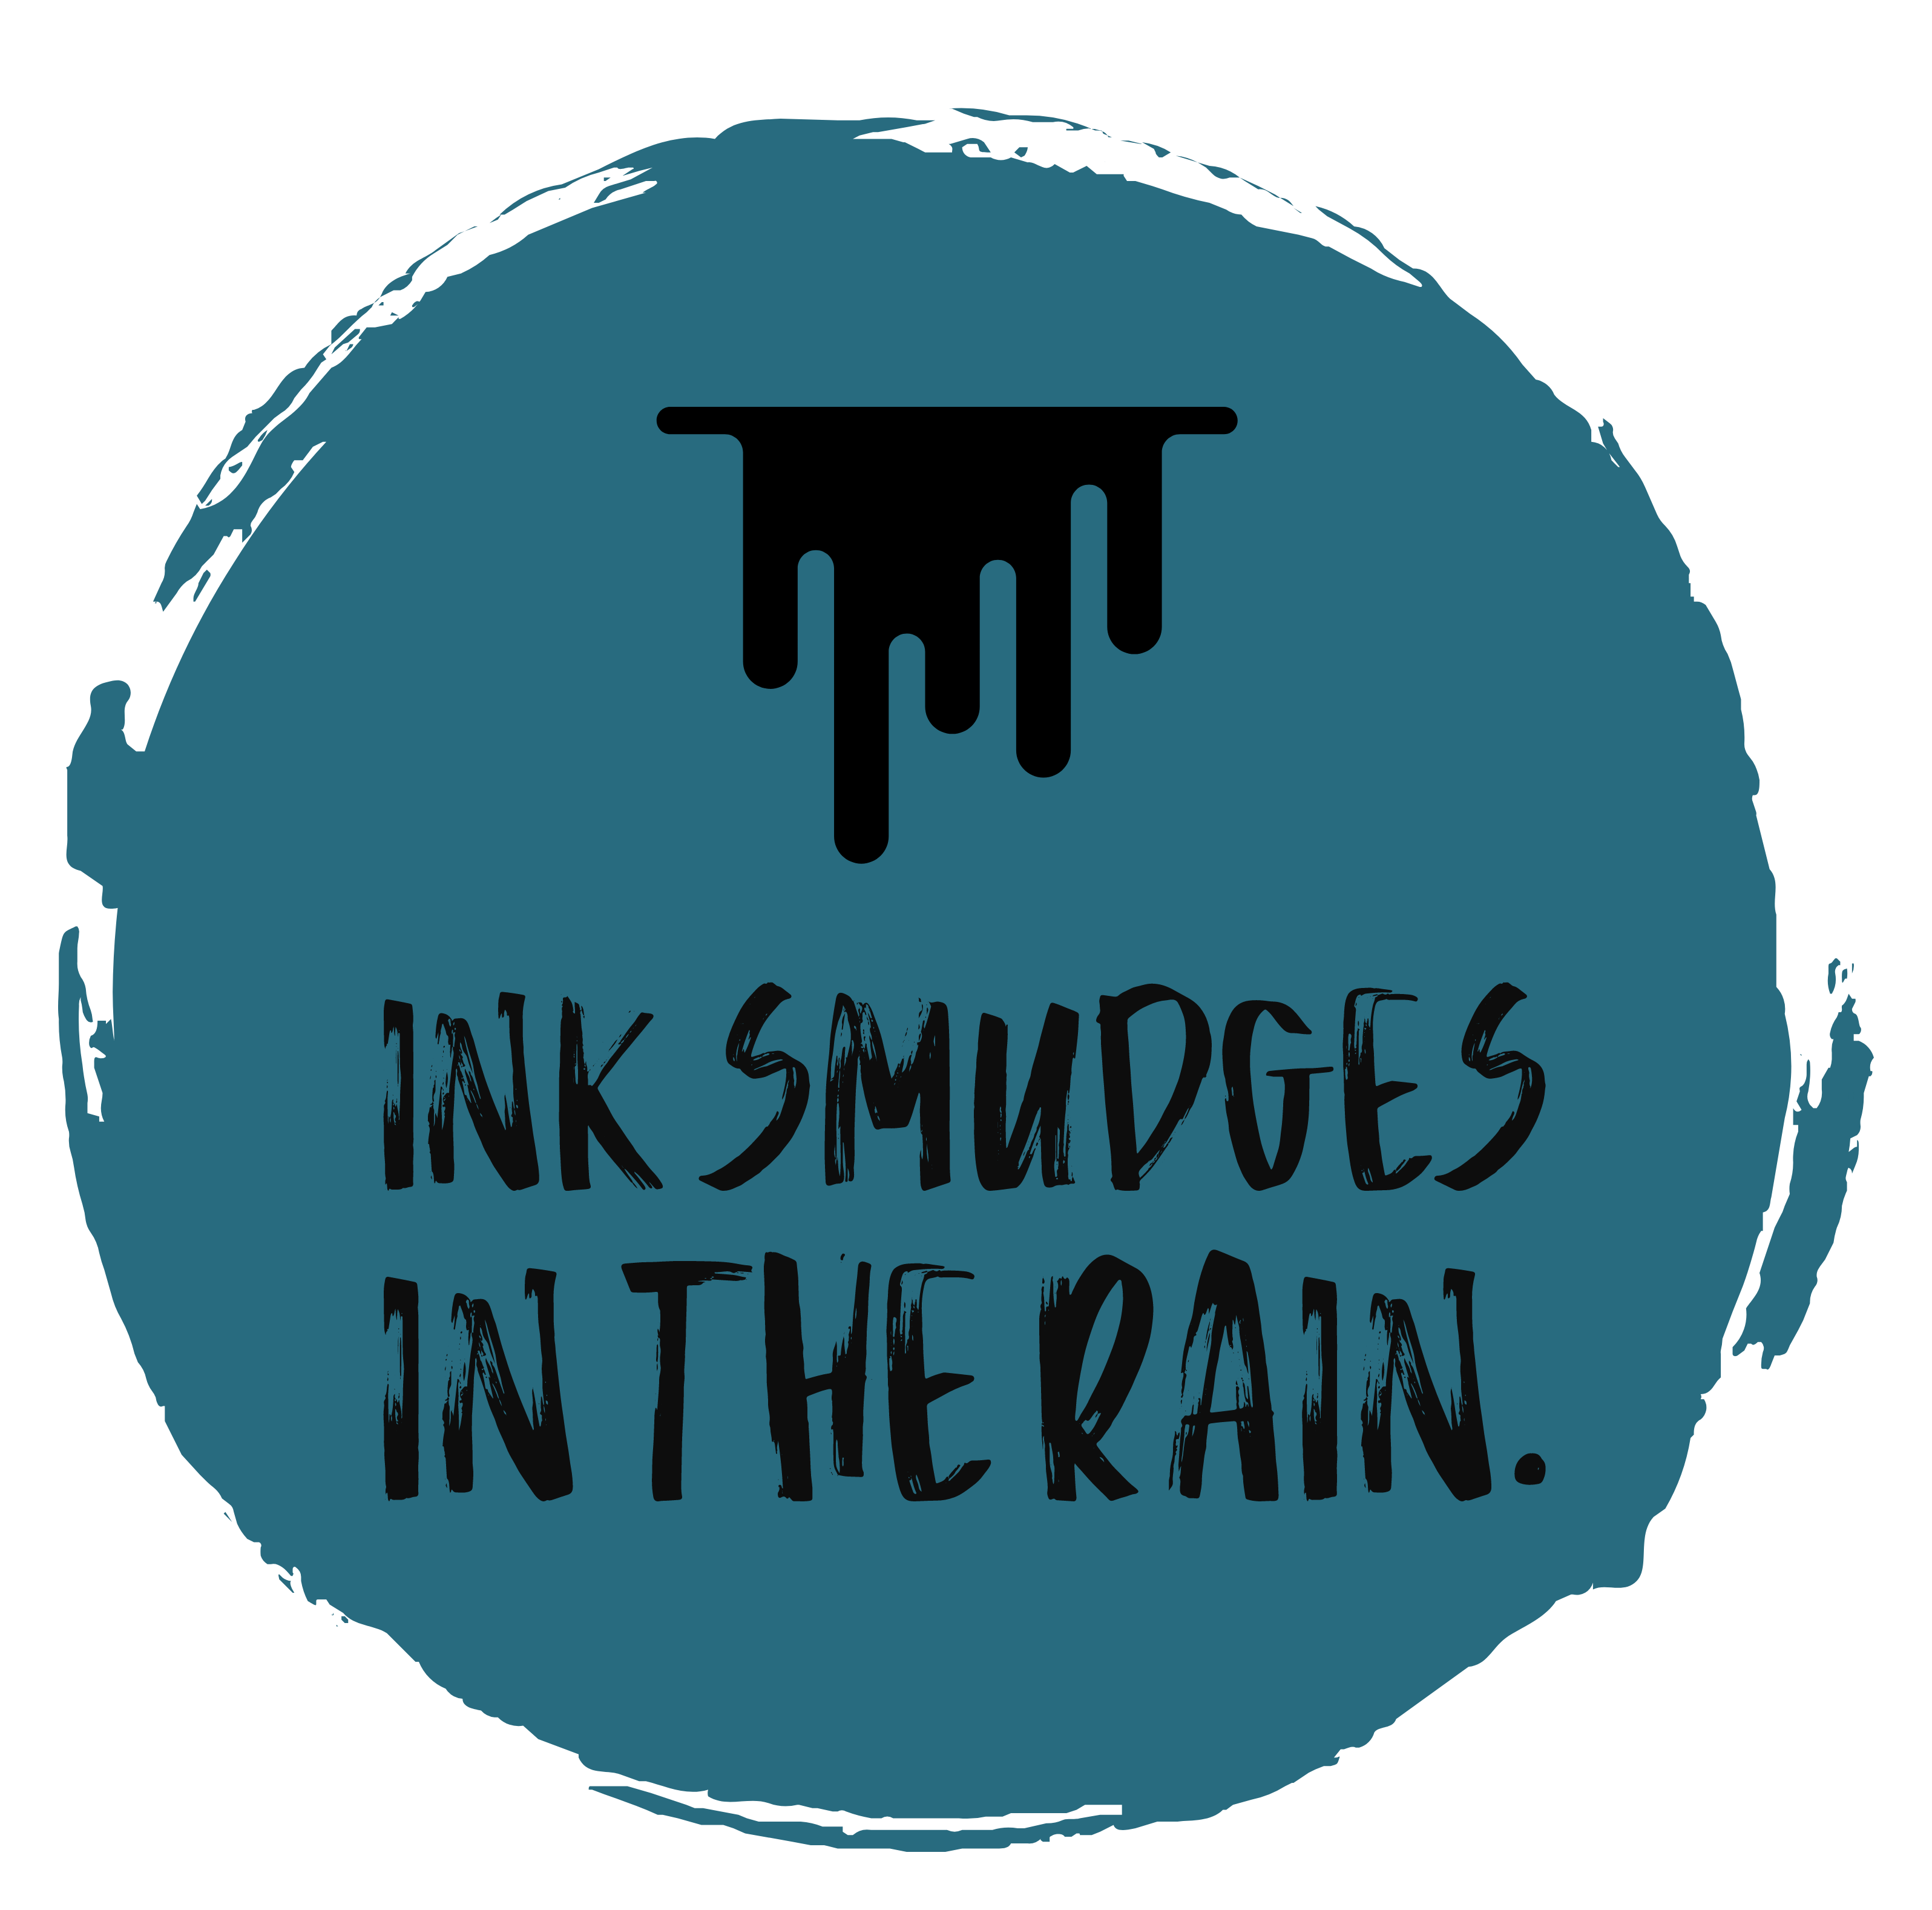 Ink smudges in the rain.